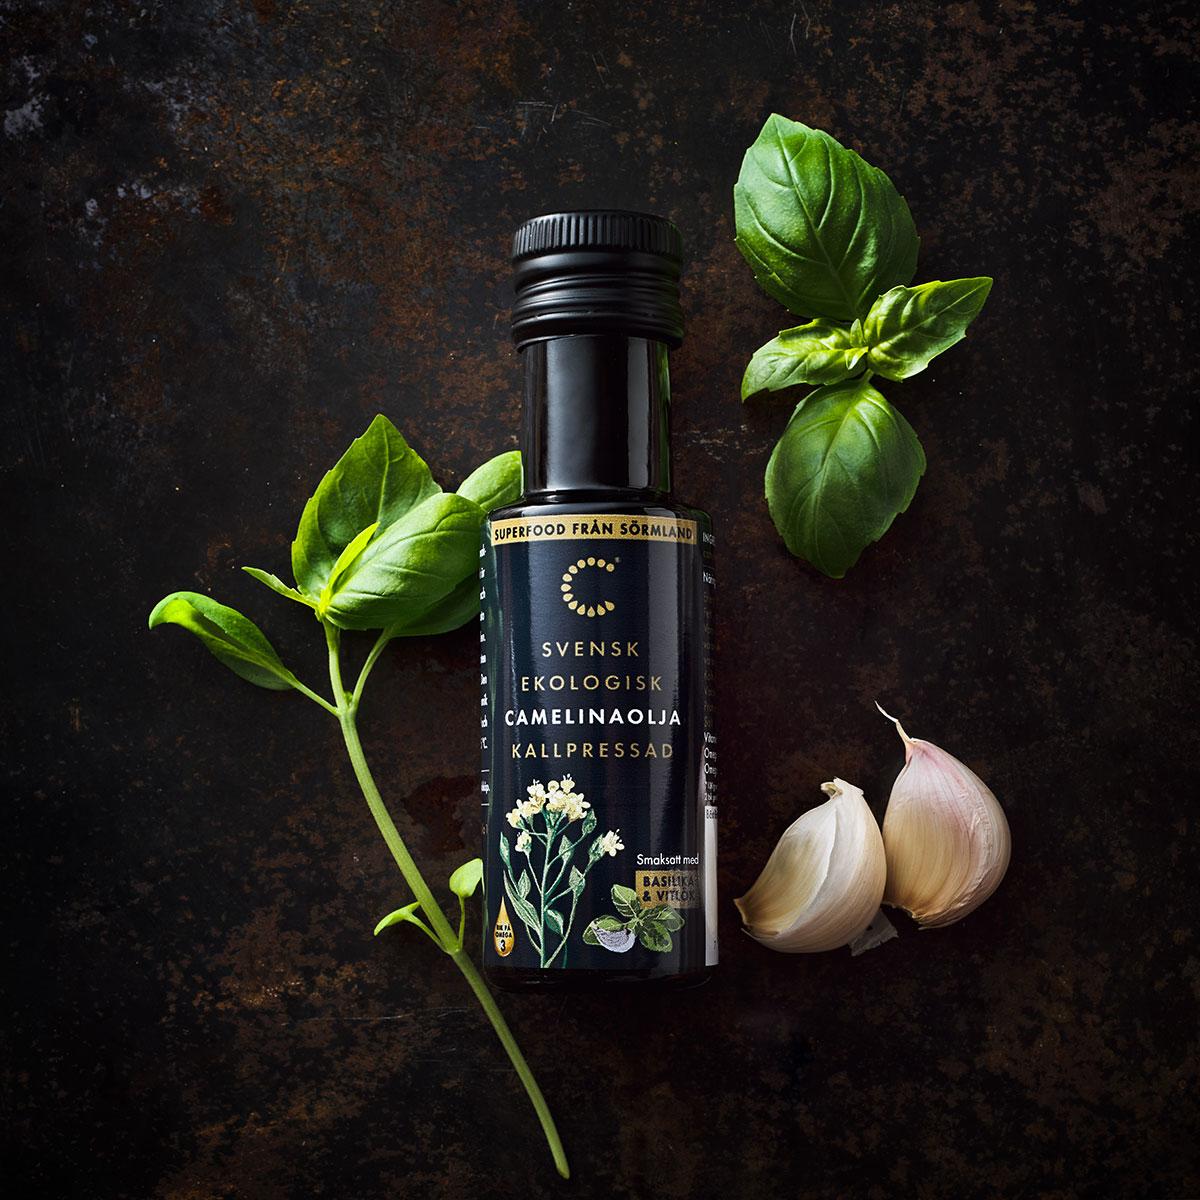 Camelina oil flavored with basil and garlic